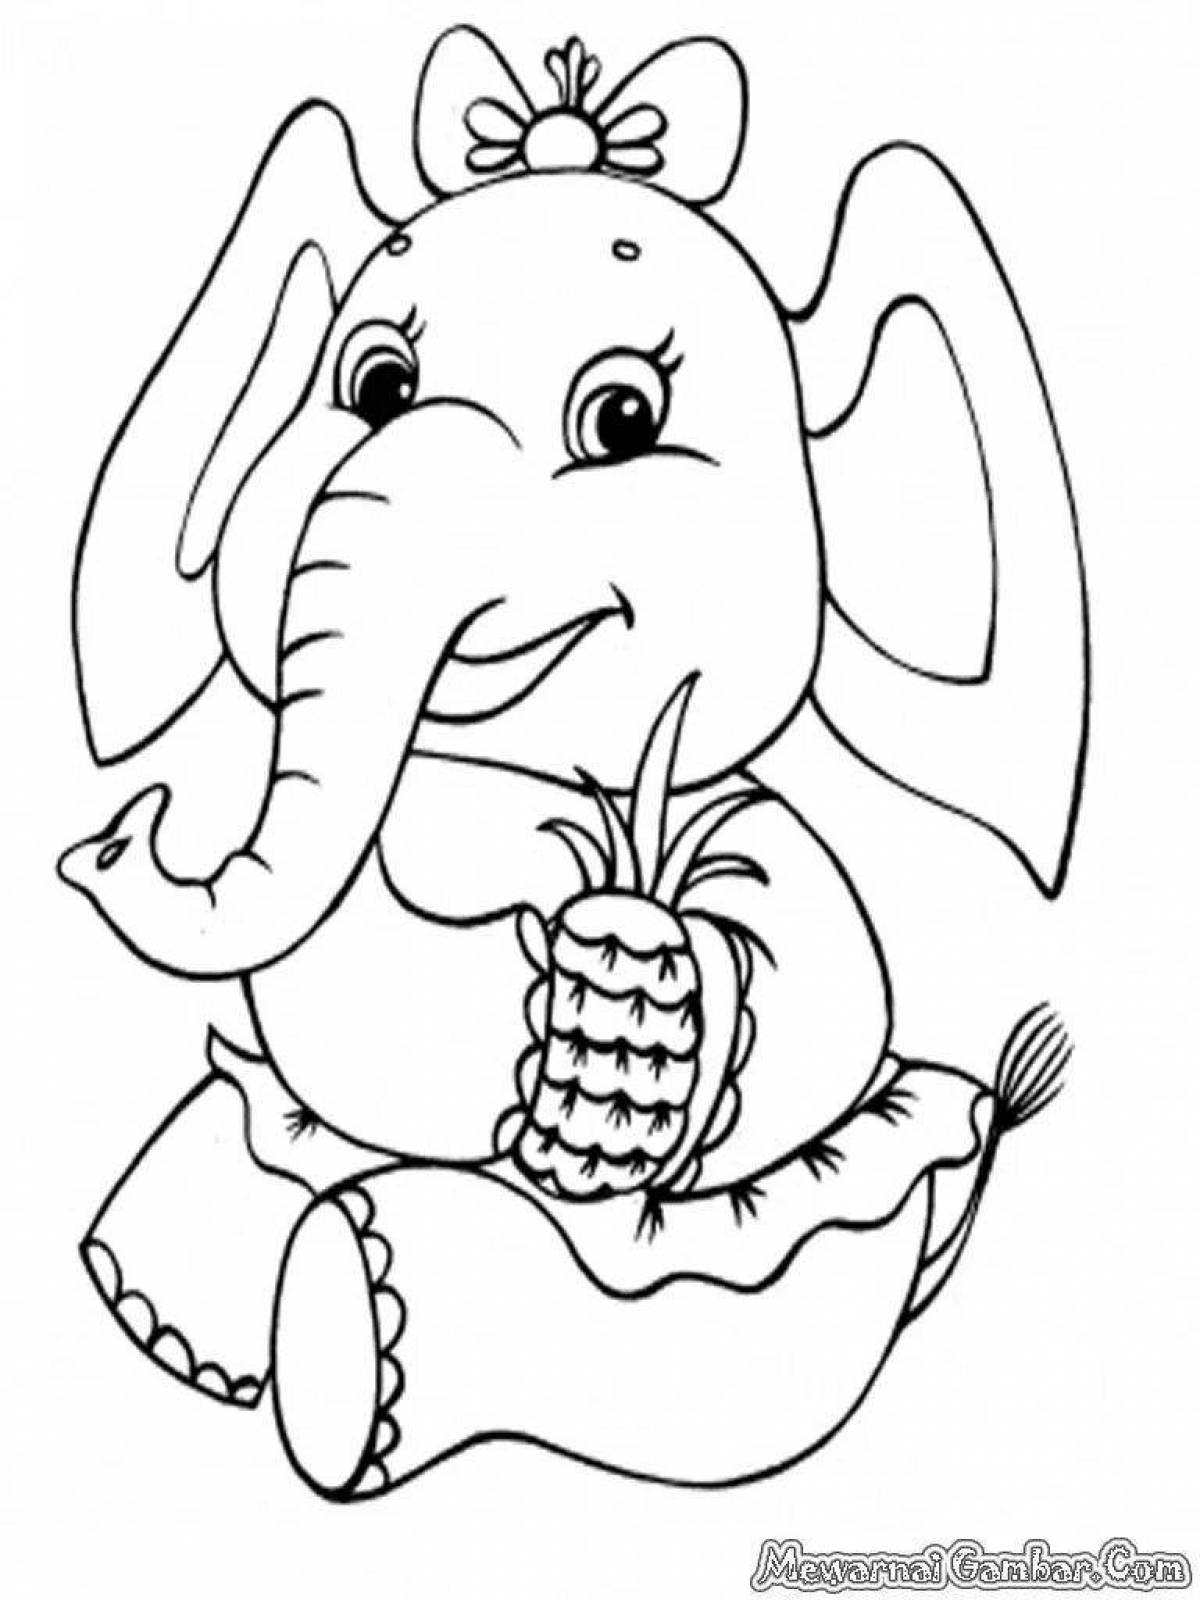 Gorgeous Chukovsky coloring page